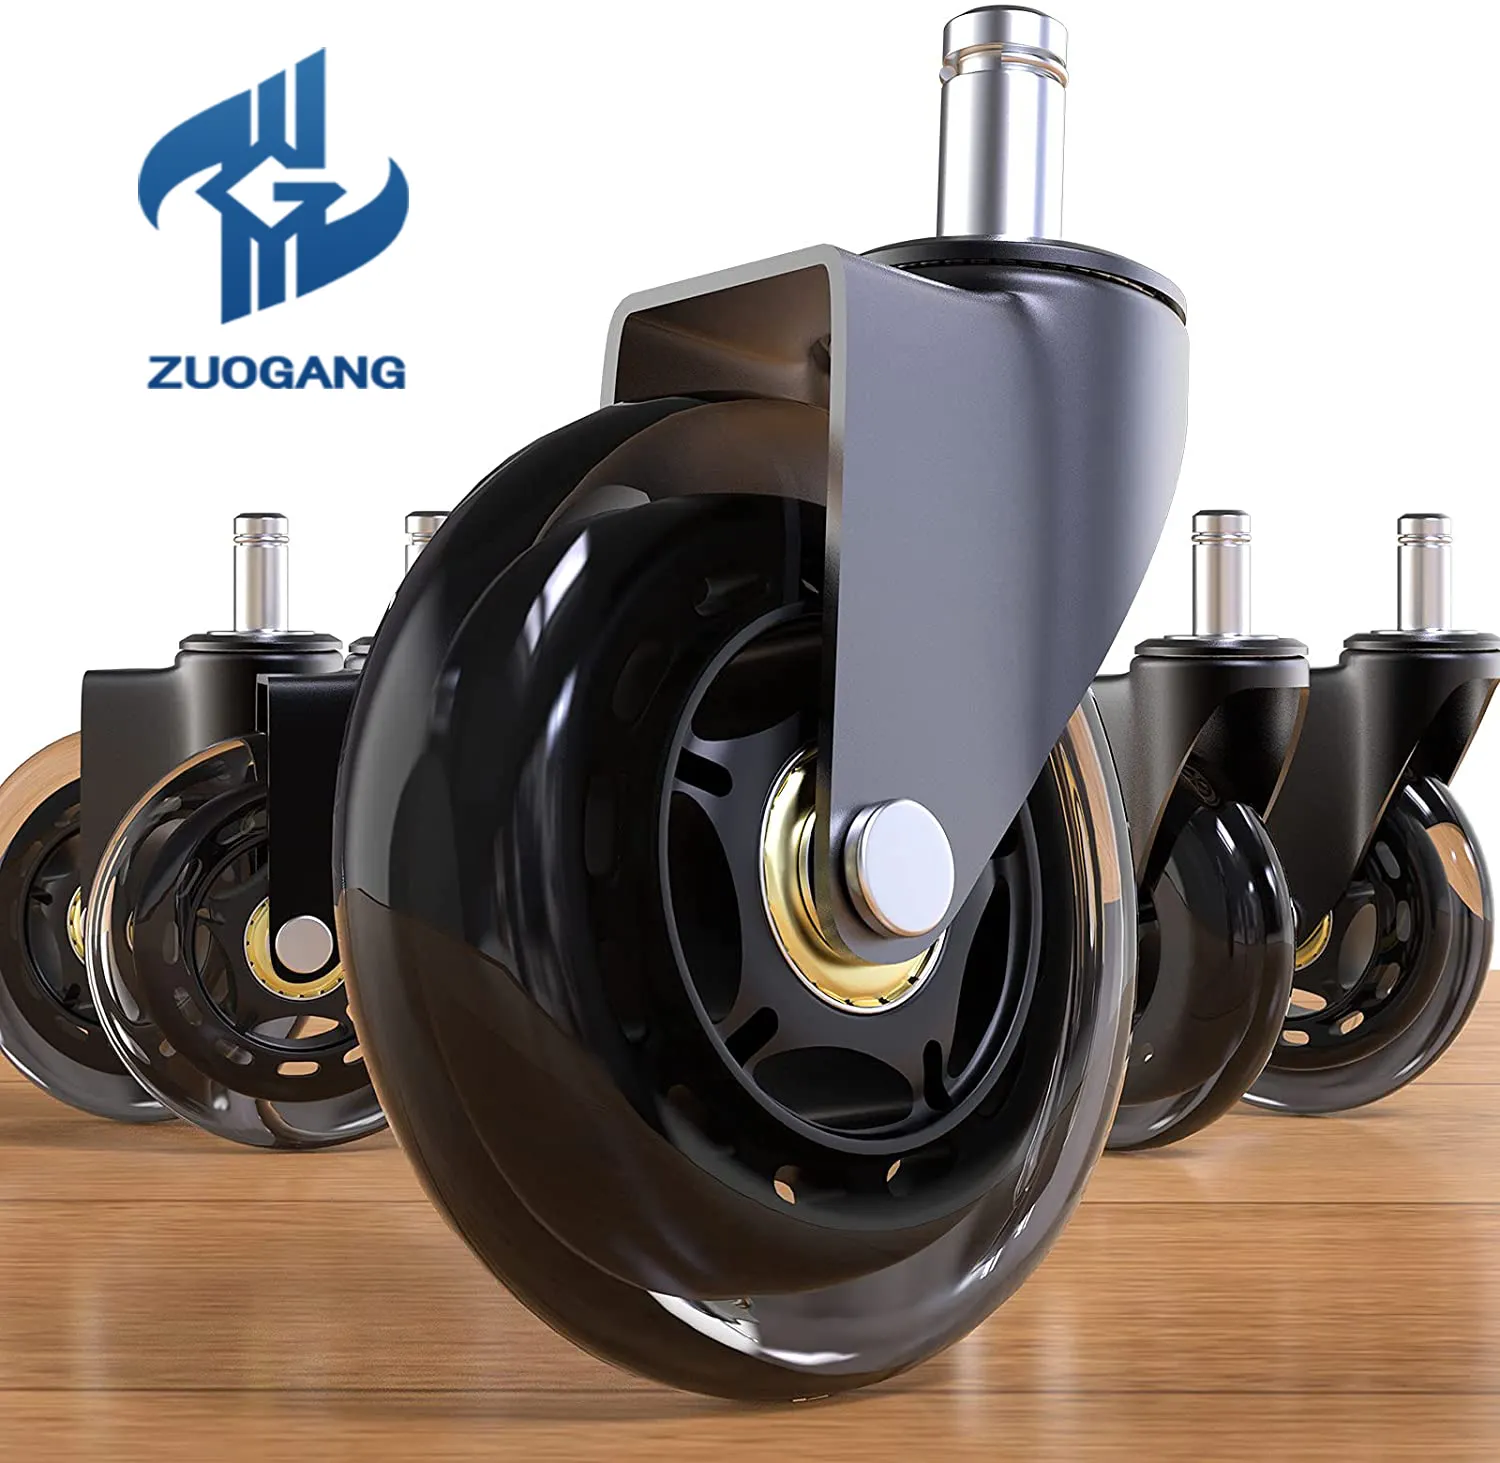 Zuogang Custom Pu Caster Wheel Trolley Caster Wheels 6 Inch For Office Chairs